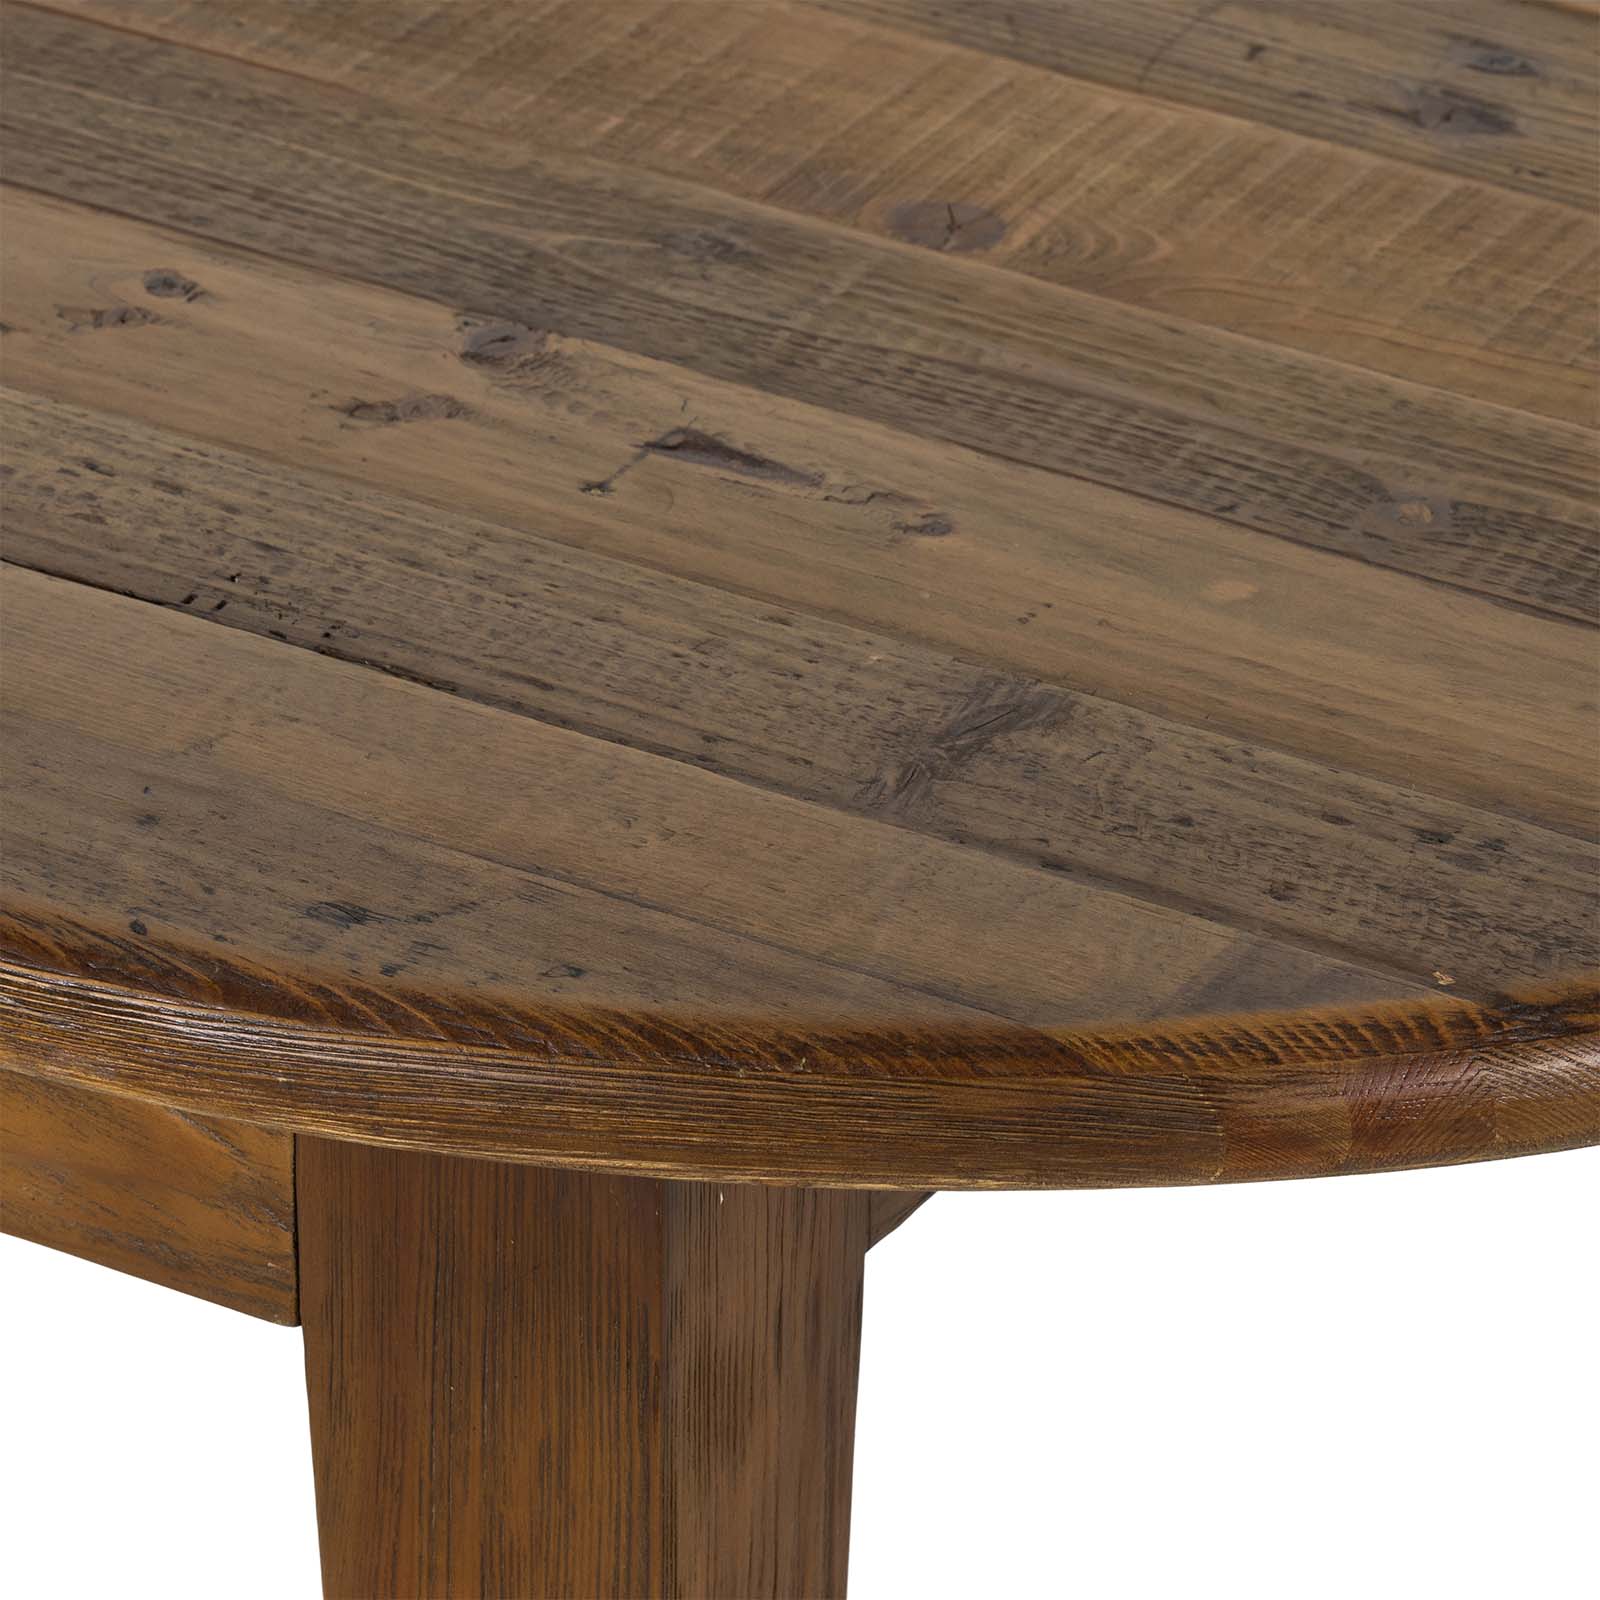 Creed 87" Dining Table